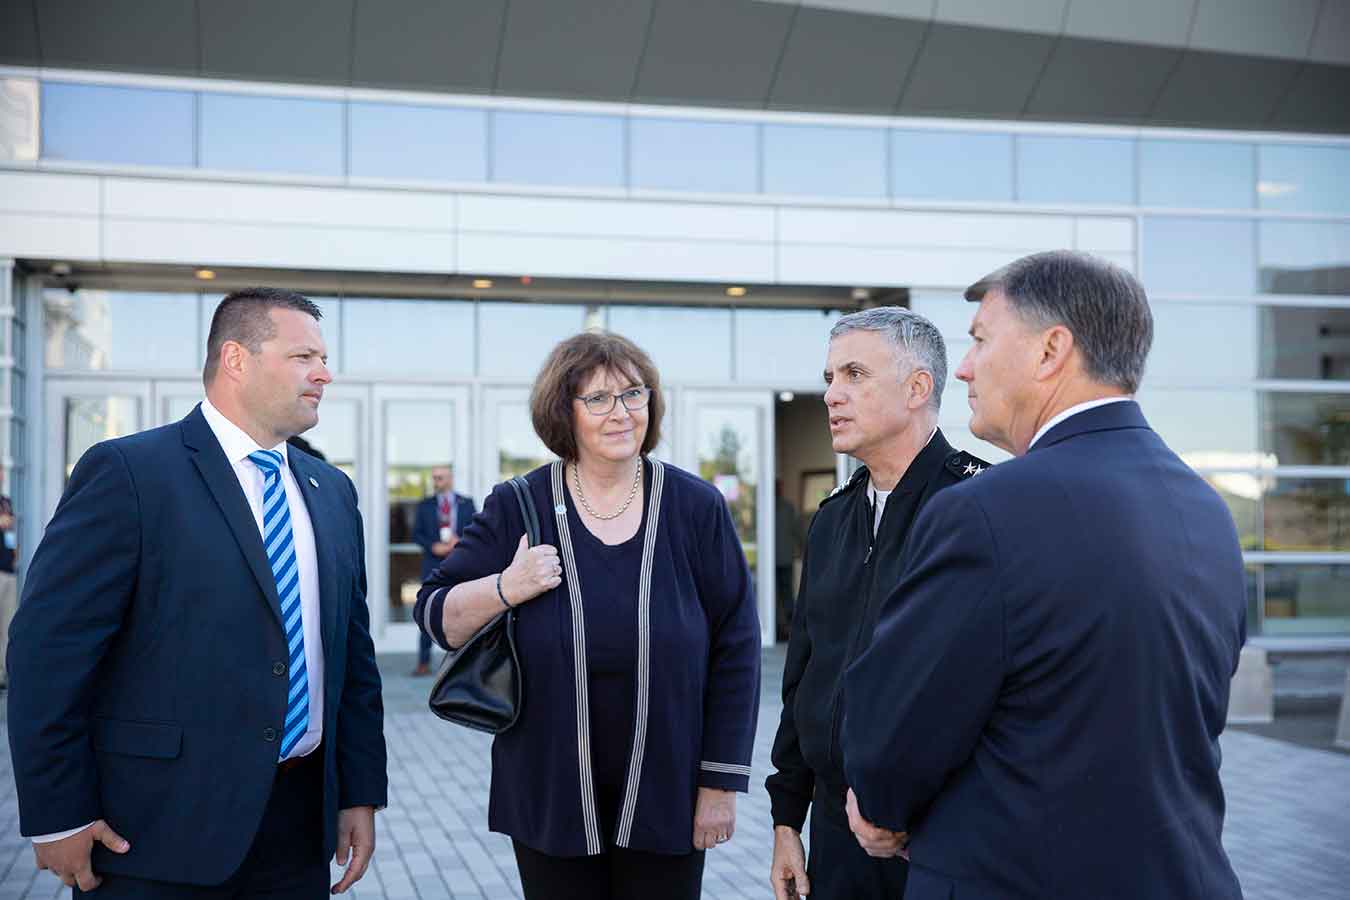 DSU Applied Research Lab Director Dr. Josh Pauli, Gen. Paul M. Nakasone, Commander, U.S. Cyber Command and Director, National Security Agency/Chief, Central Security Service, Sen. Mike Rounds, and DSU President Dr. José-Marie Griffiths.